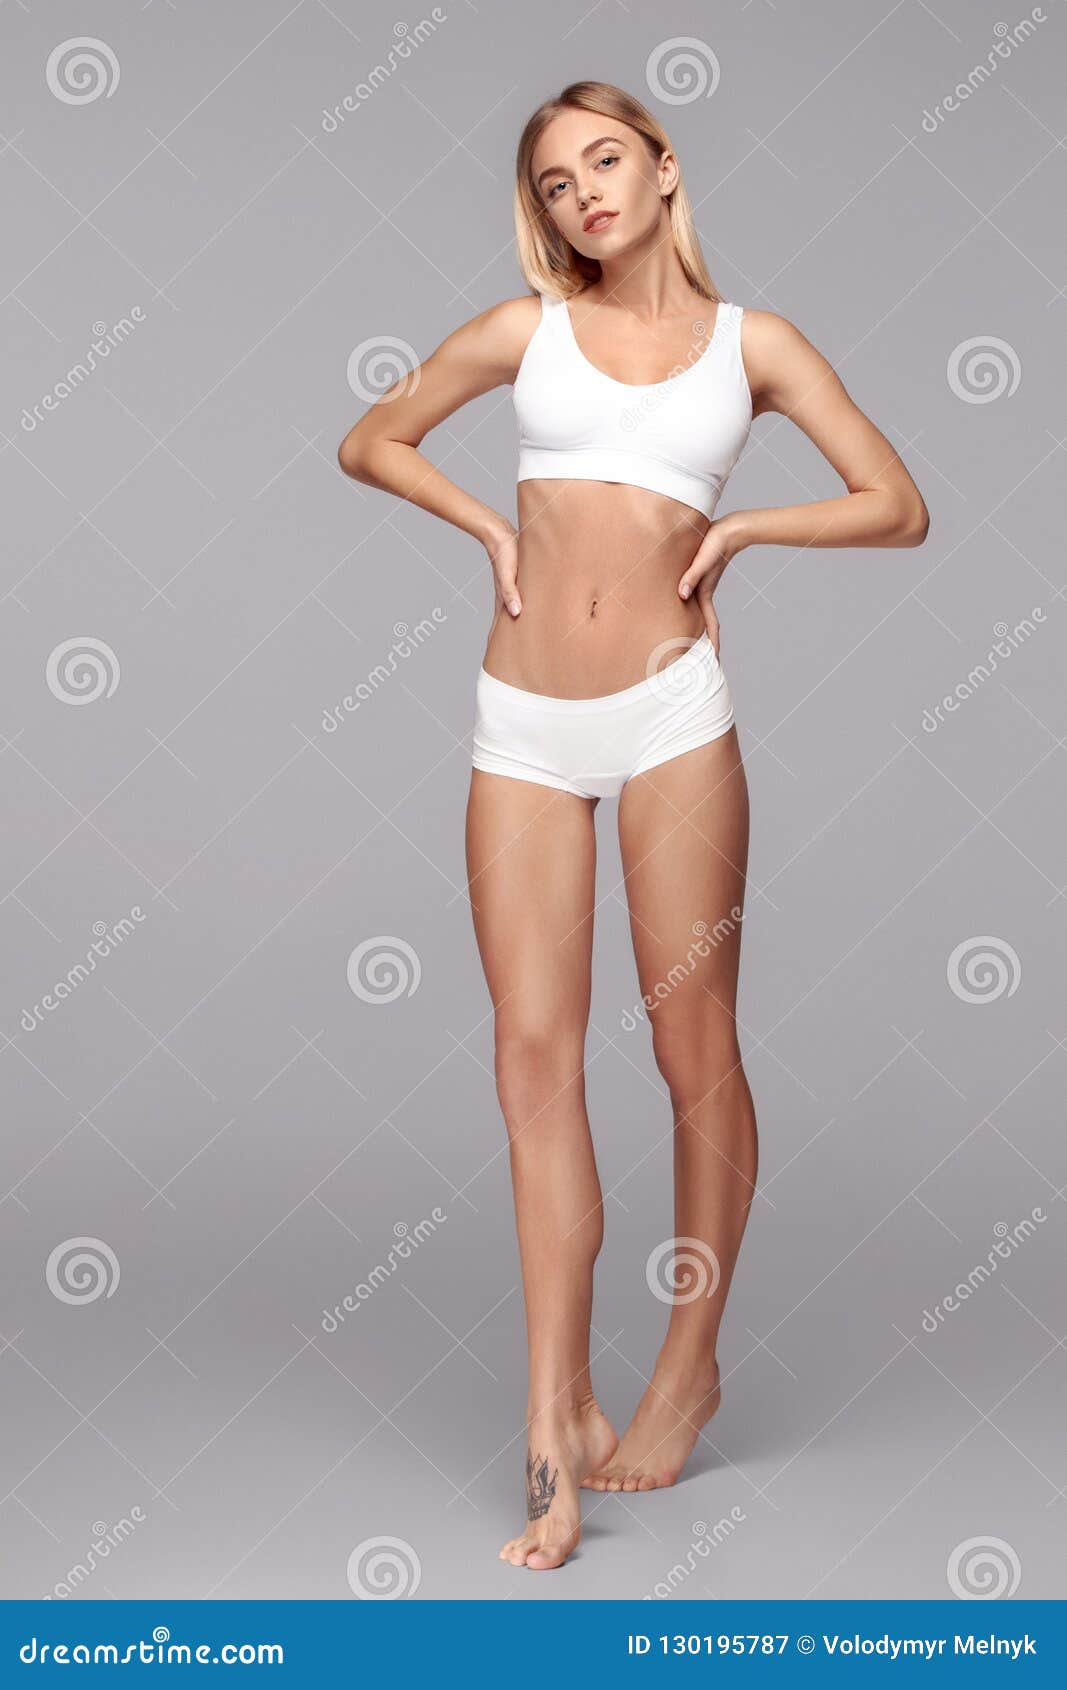 Perfect Slim Toned Young Body of the Girl . Stock Image - Image of health,  beautiful: 130195787